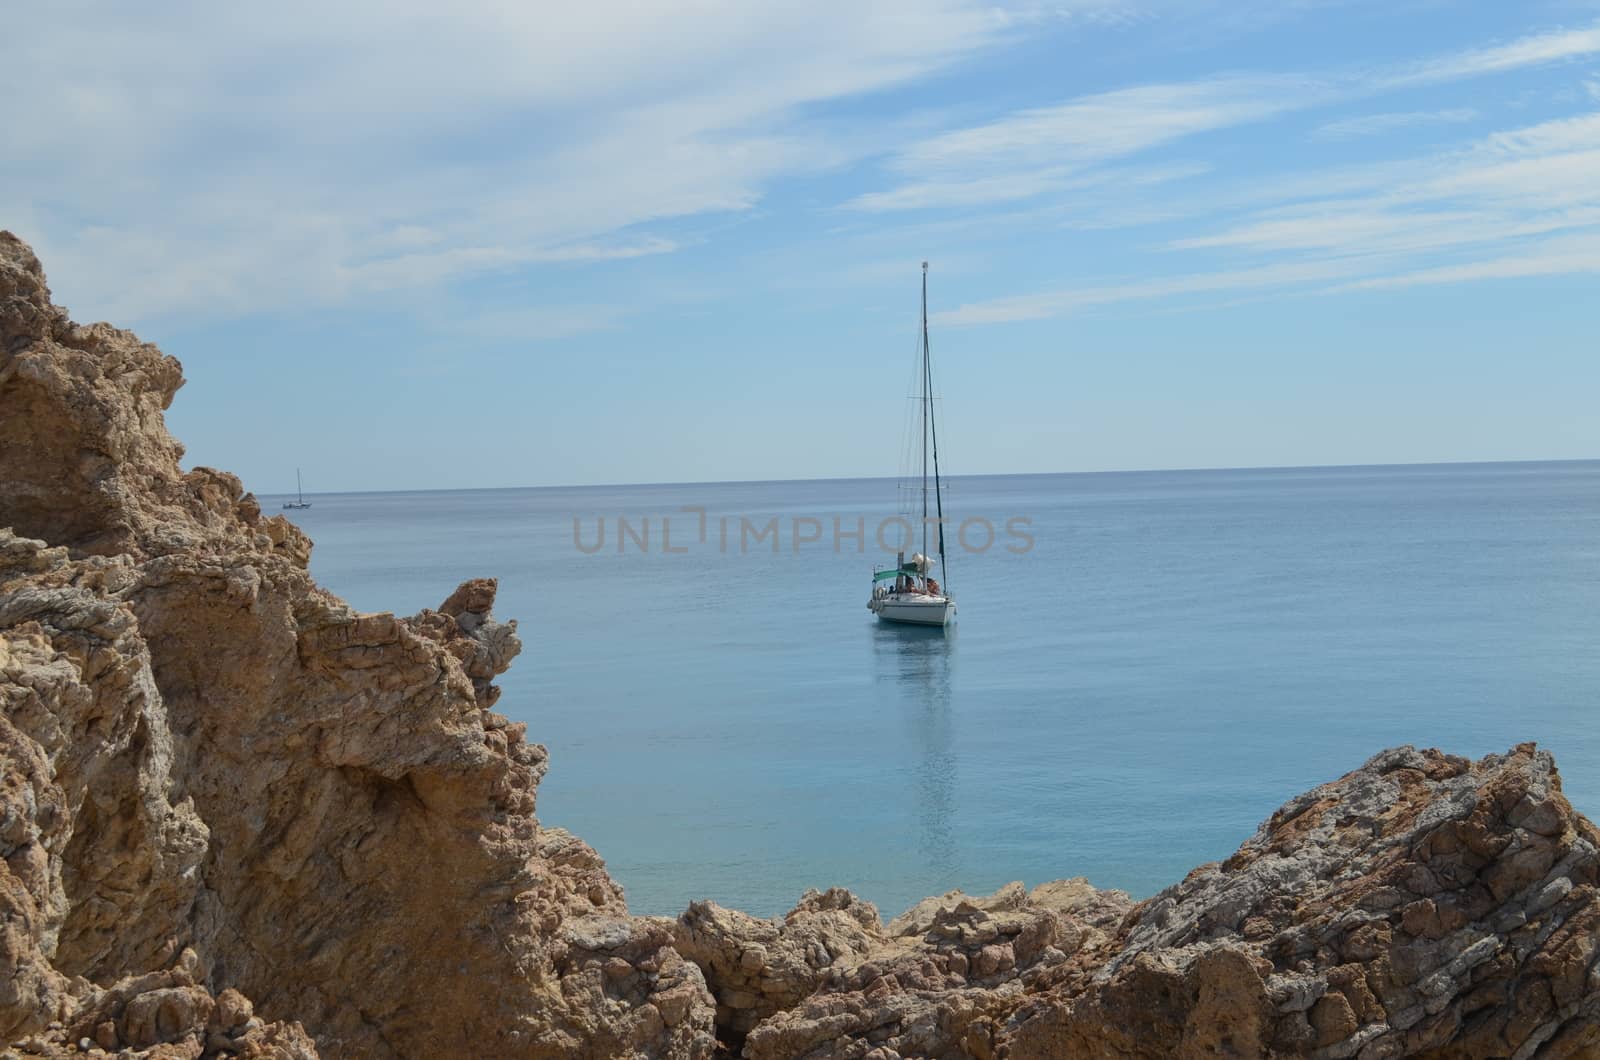 Sailboat in The Mediterranean Sea In Calm Water With a Rock in The Fore Ground by TheDutchcowboy